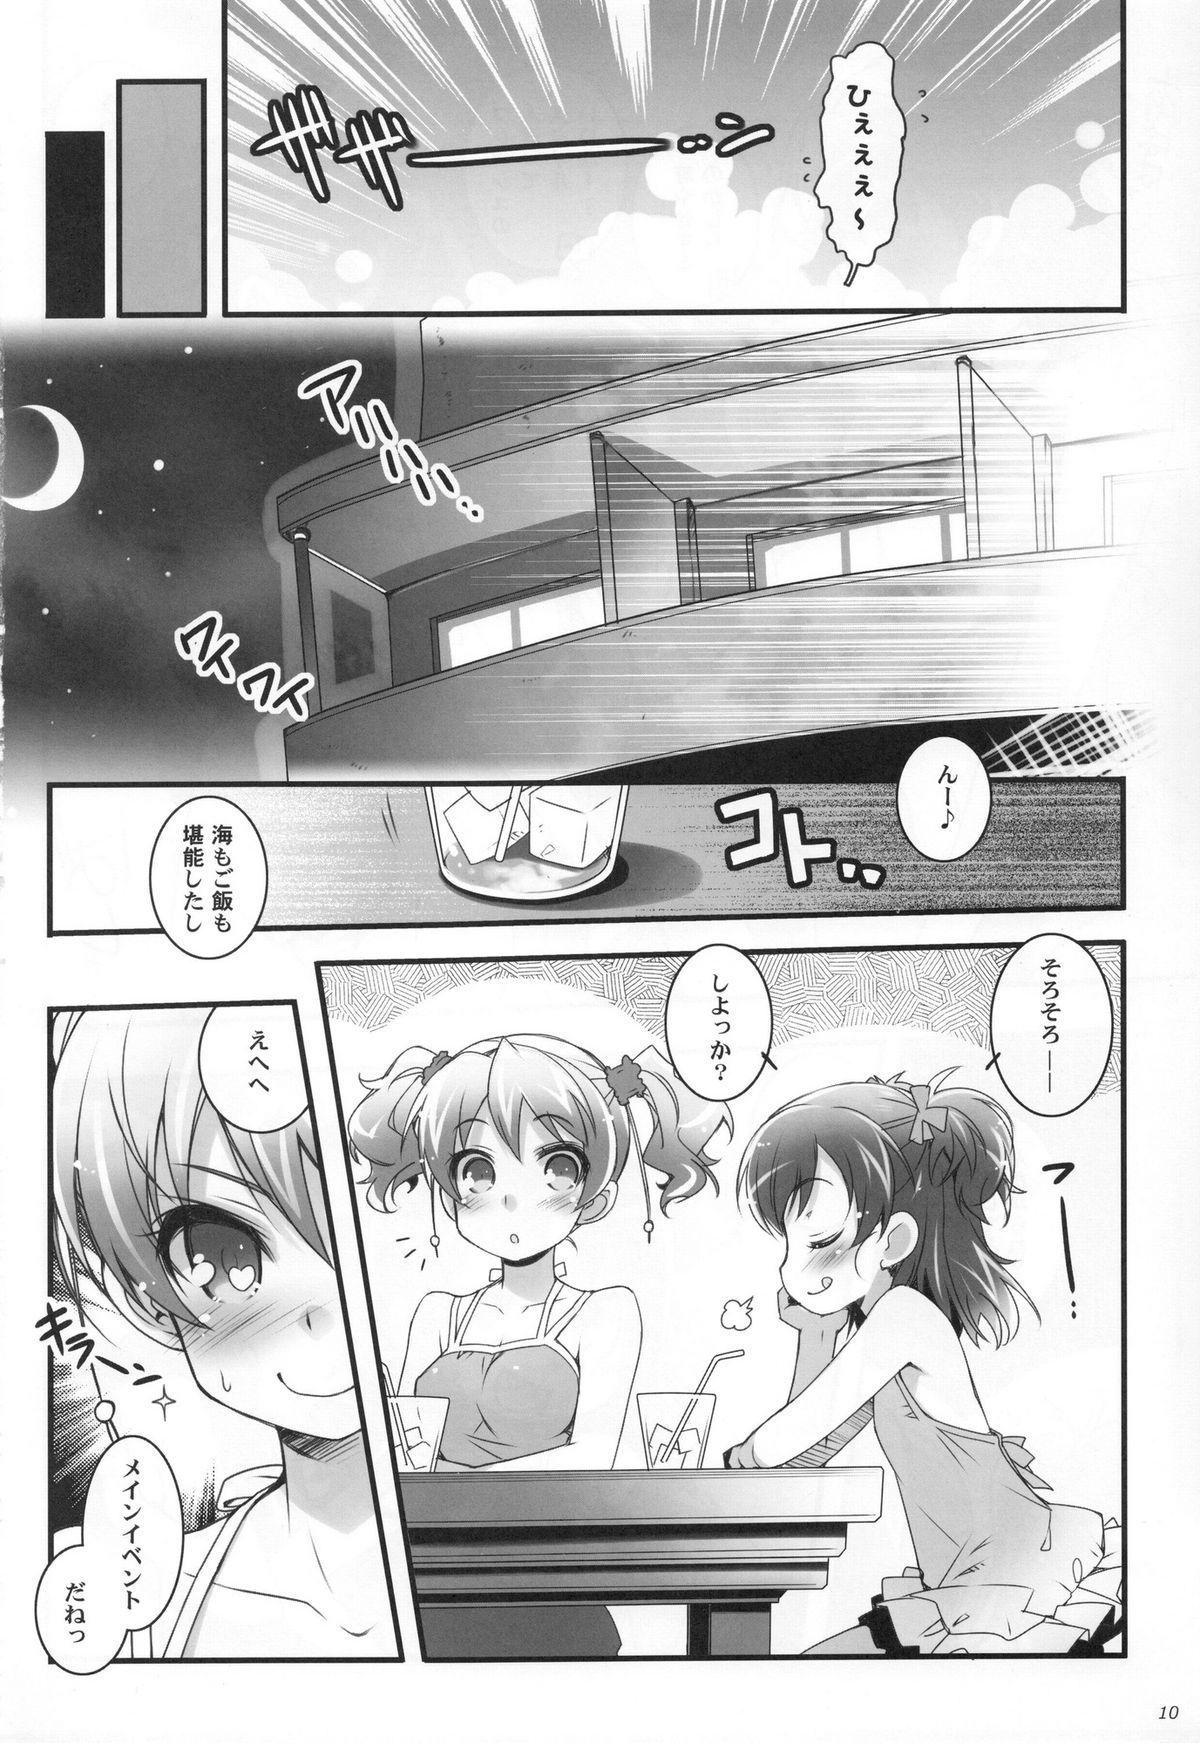 Red Head Sweet Summer Vacation! - Pretty cure Suite precure Kink - Page 10